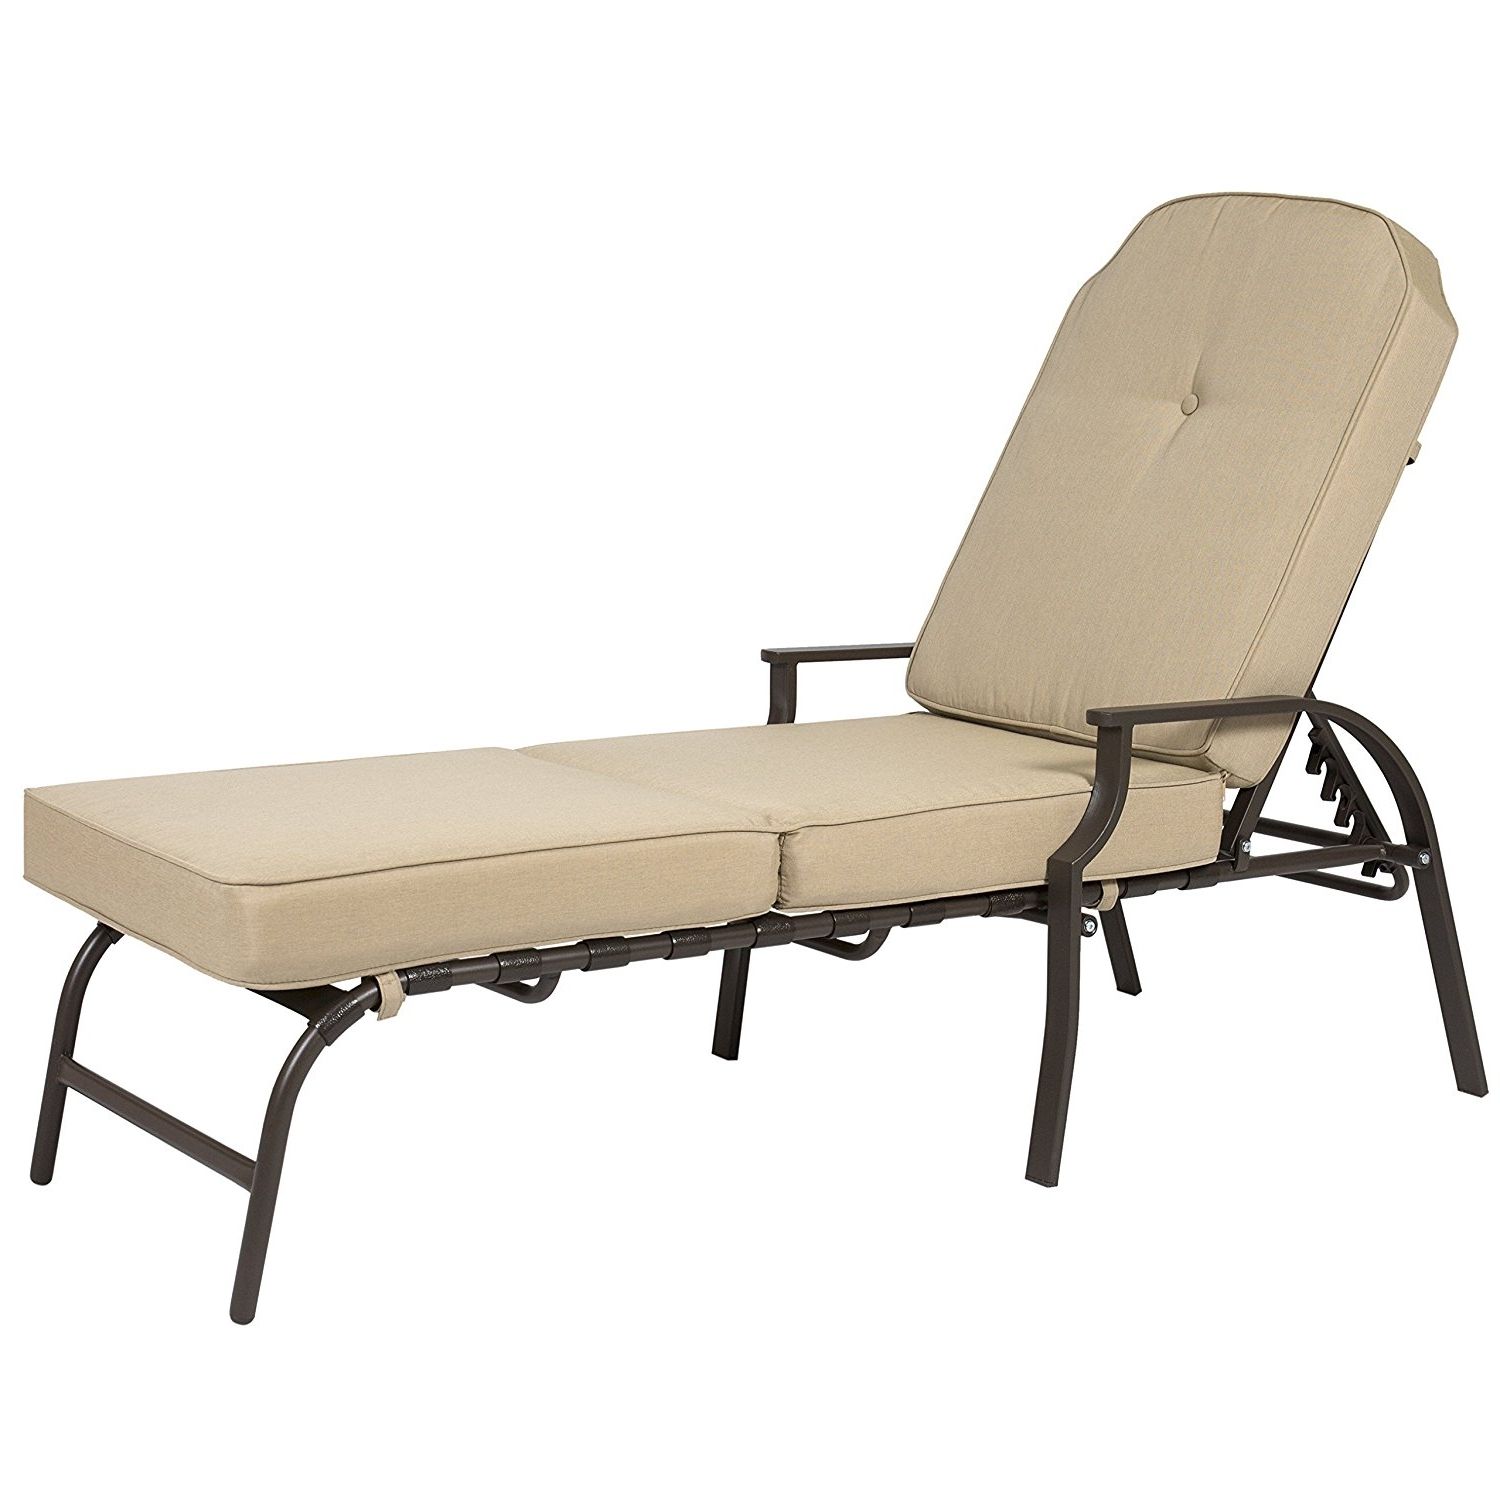 Amazon : Best Choice Products Outdoor Chaise Lounge Chair W In Most Popular Pool Chaise Lounge Chairss (View 8 of 15)